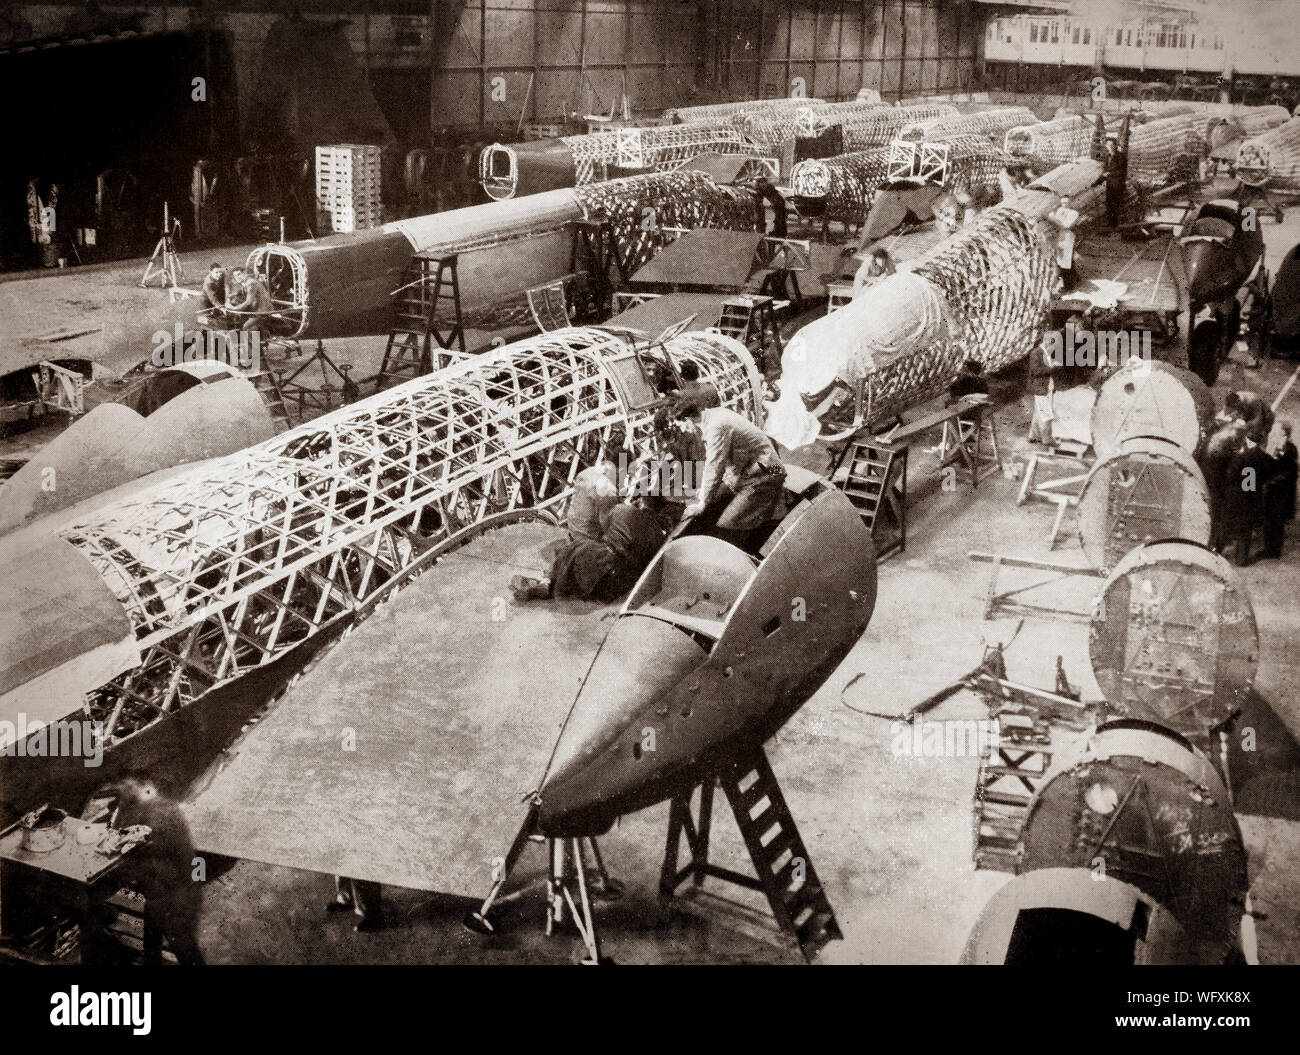 The production line of Vickers-Armstrong Wellington, twin-engined, long-range medium bomber. It was designed during the mid-1930s  by Vickers-Armstrongs' chief designer Rex Pierson; a key feature of the aircraft is its geodetic airframe fuselage structure that gave strength and lightness, principally designed by Barnes Wallis. With a flurry of order and production having been assured by the end of 1937, Vickers set about simplifying the manufacturing process of the aircraft and announced a target of building one Wellington per day. Stock Photo